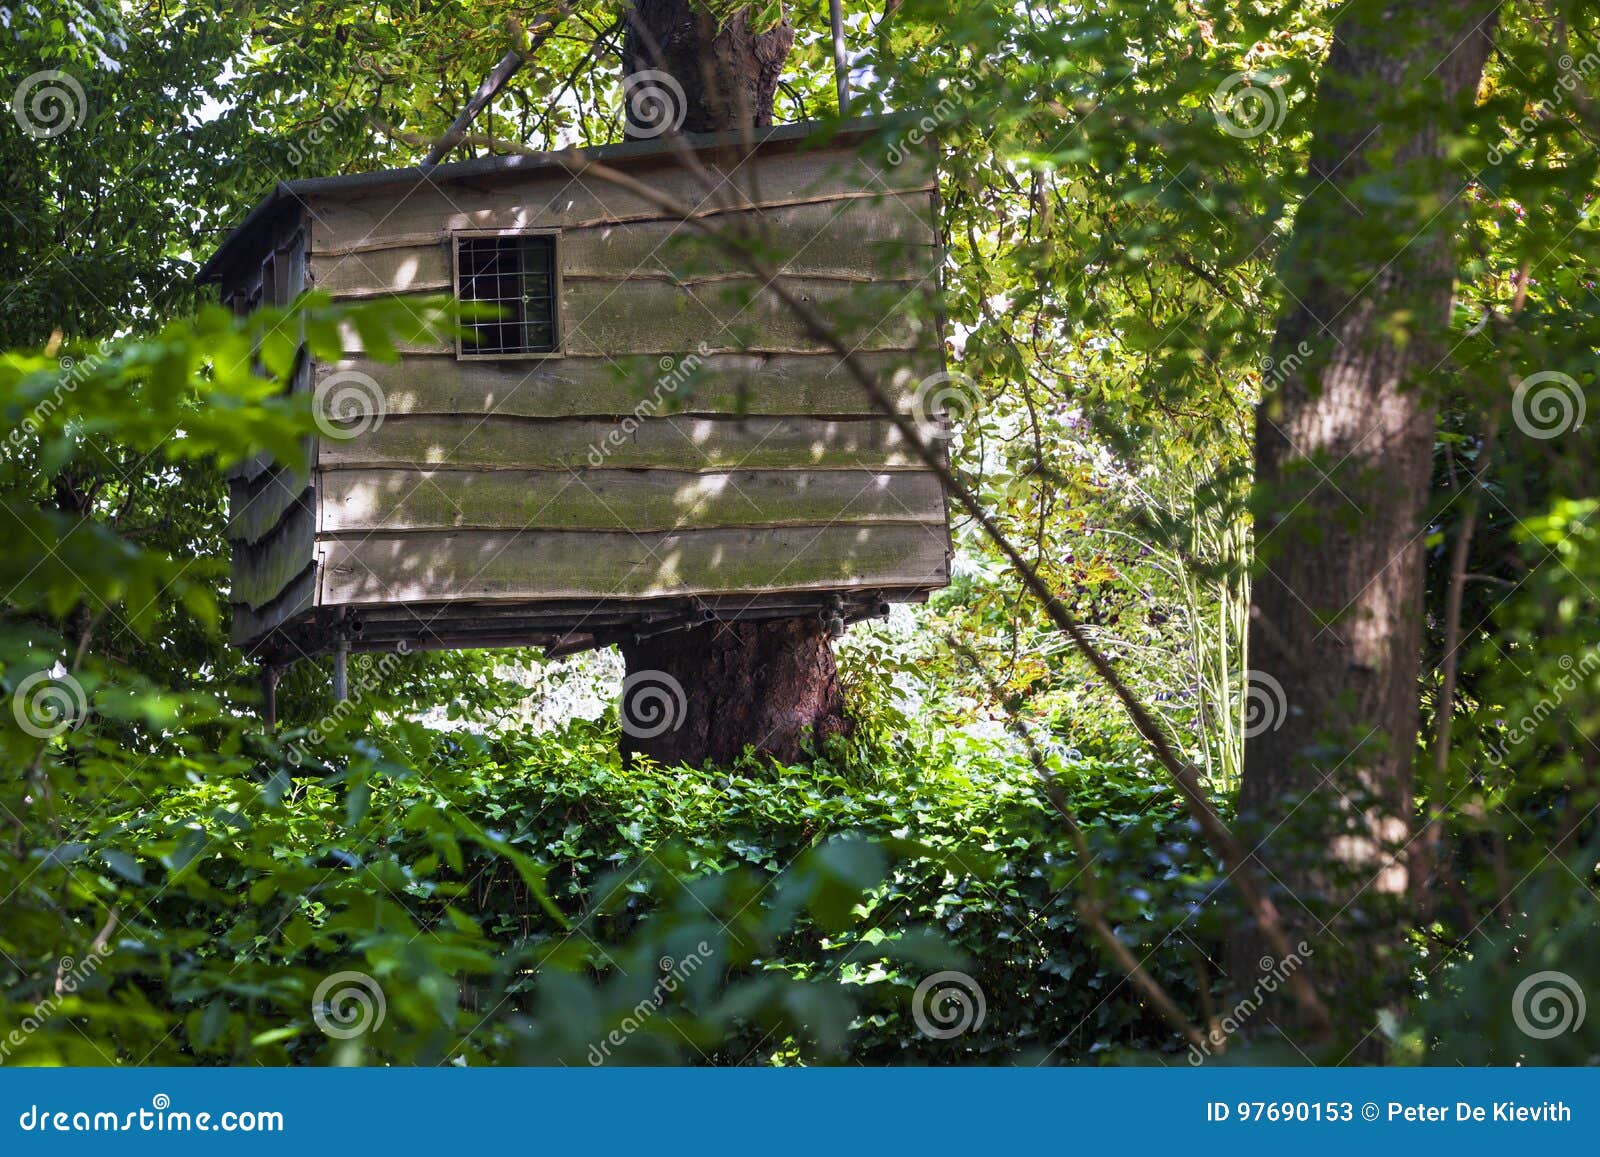 Treehouse In The Woods Stock Image Image Of House Outside 97690153